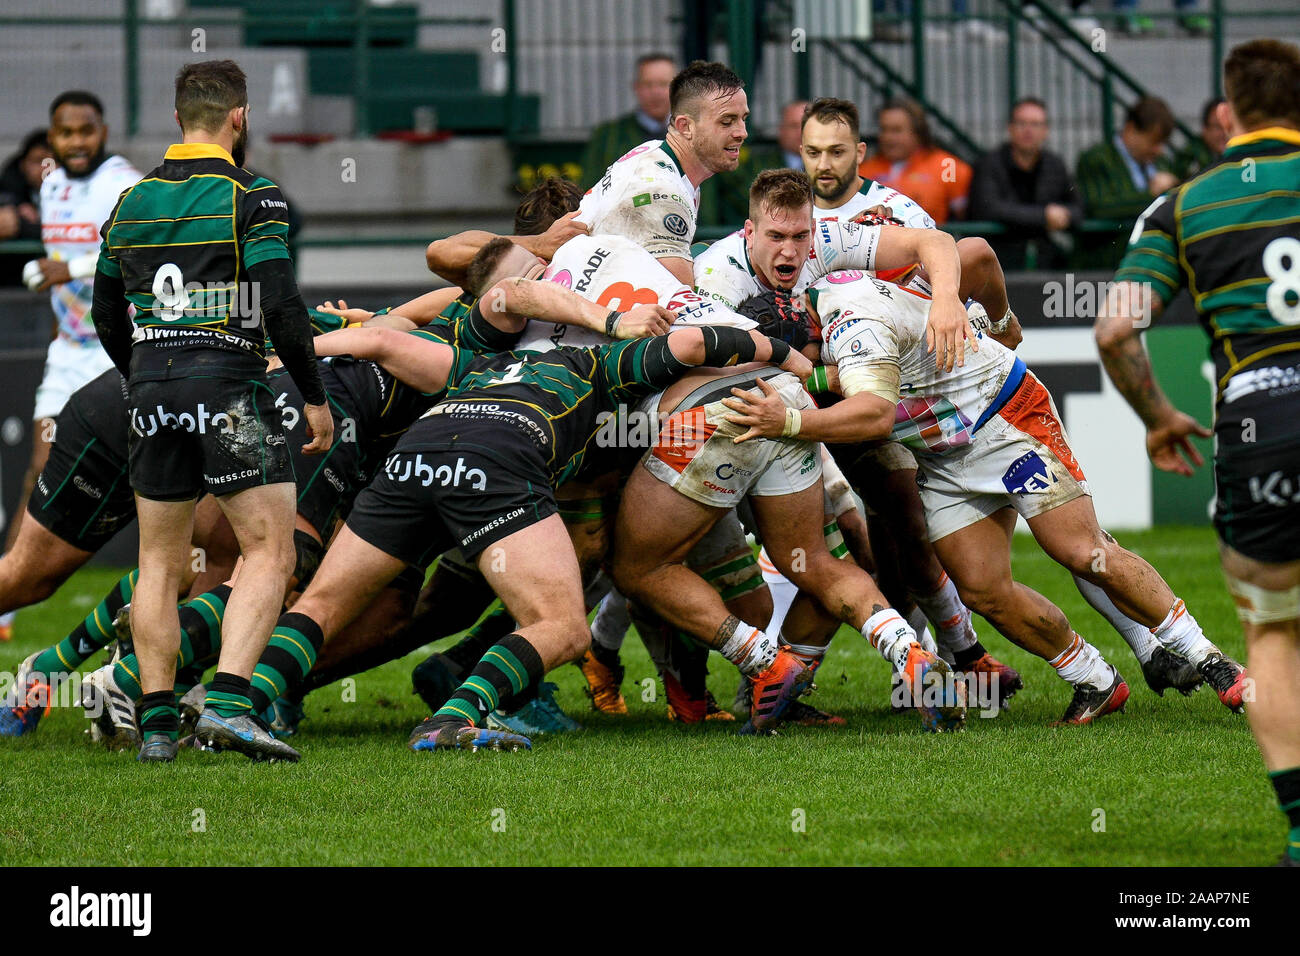 Benetton Treviso Rugby High Resolution Stock Photography and Images - Alamy